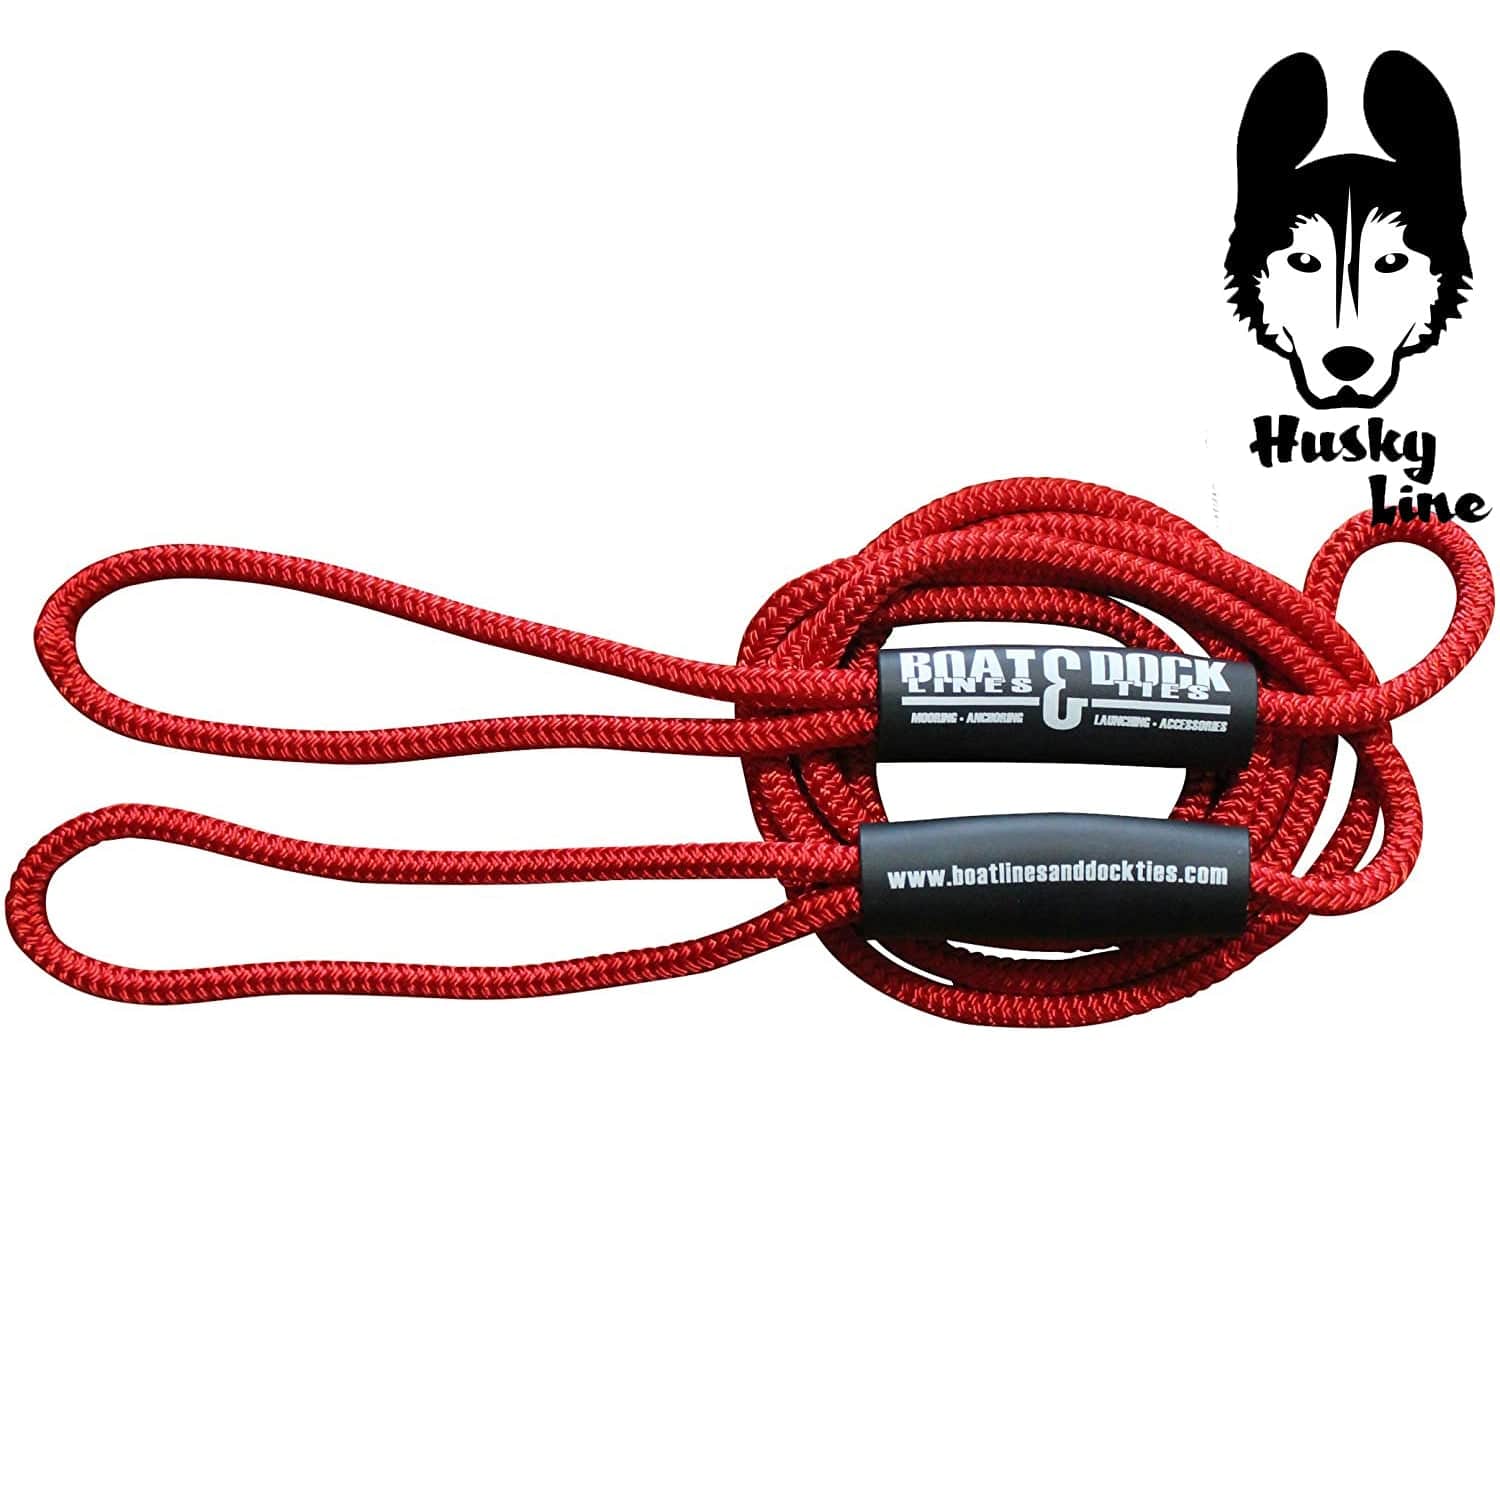 Boat Throw Rope- "Husky Line" 2 Loop Double Braided Nylon Rope, Stitched Loops and Floats - Boat Lines & Dock Ties Boat Lines & Dock Ties 25' / Red